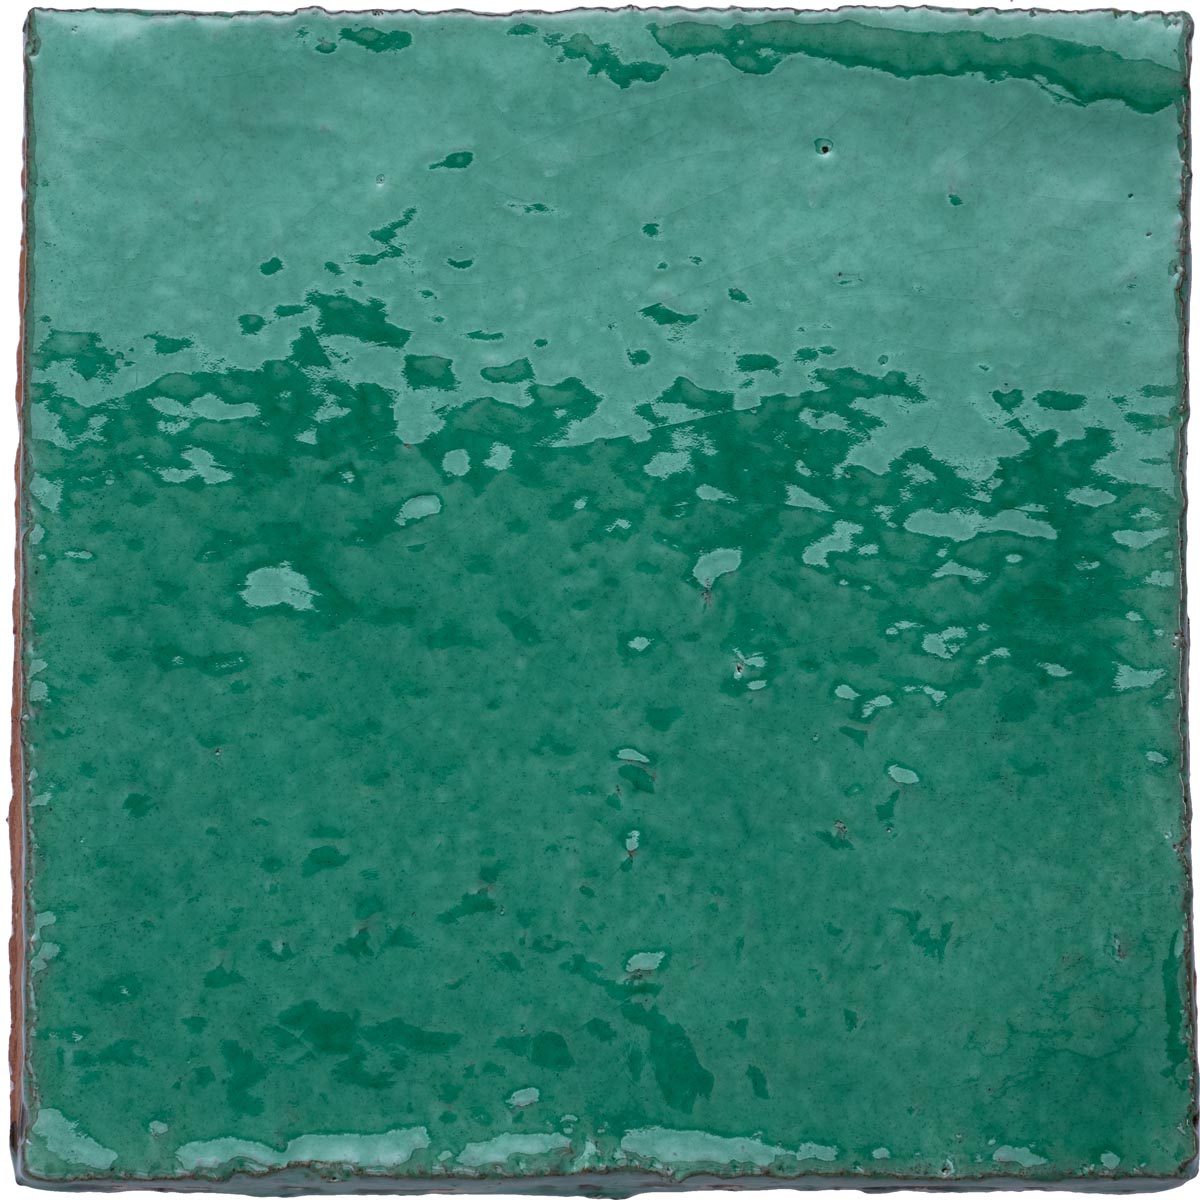 Viridian Square, product variant image